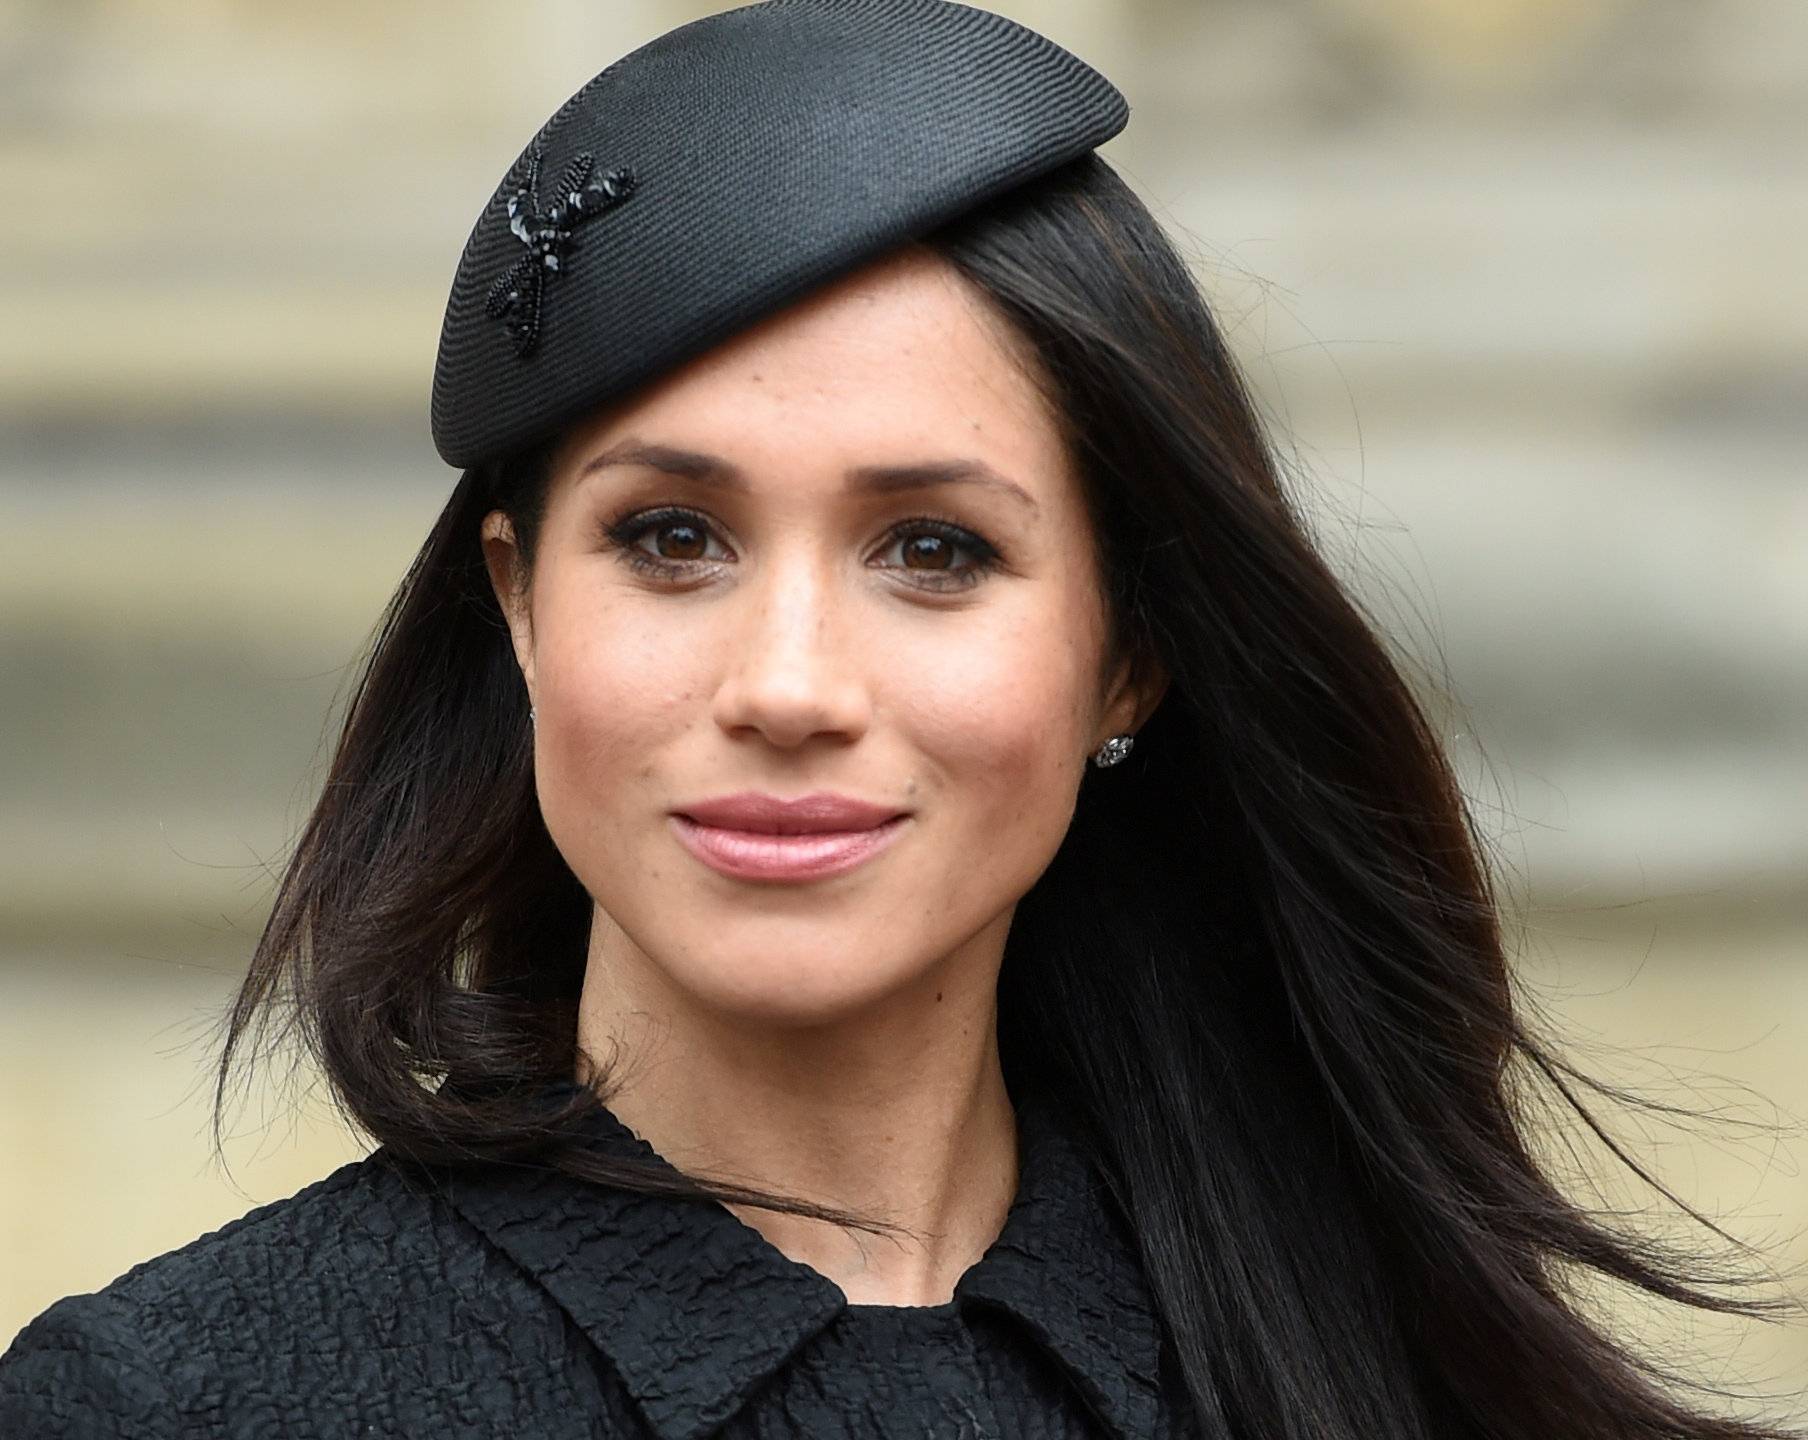 FILE PHOTO: Meghan Markle, the fiancee of Britain's Prince Harry, attends a Service of Thanksgiving and Commemoration on ANZAC Day at Westminster Abbey in London